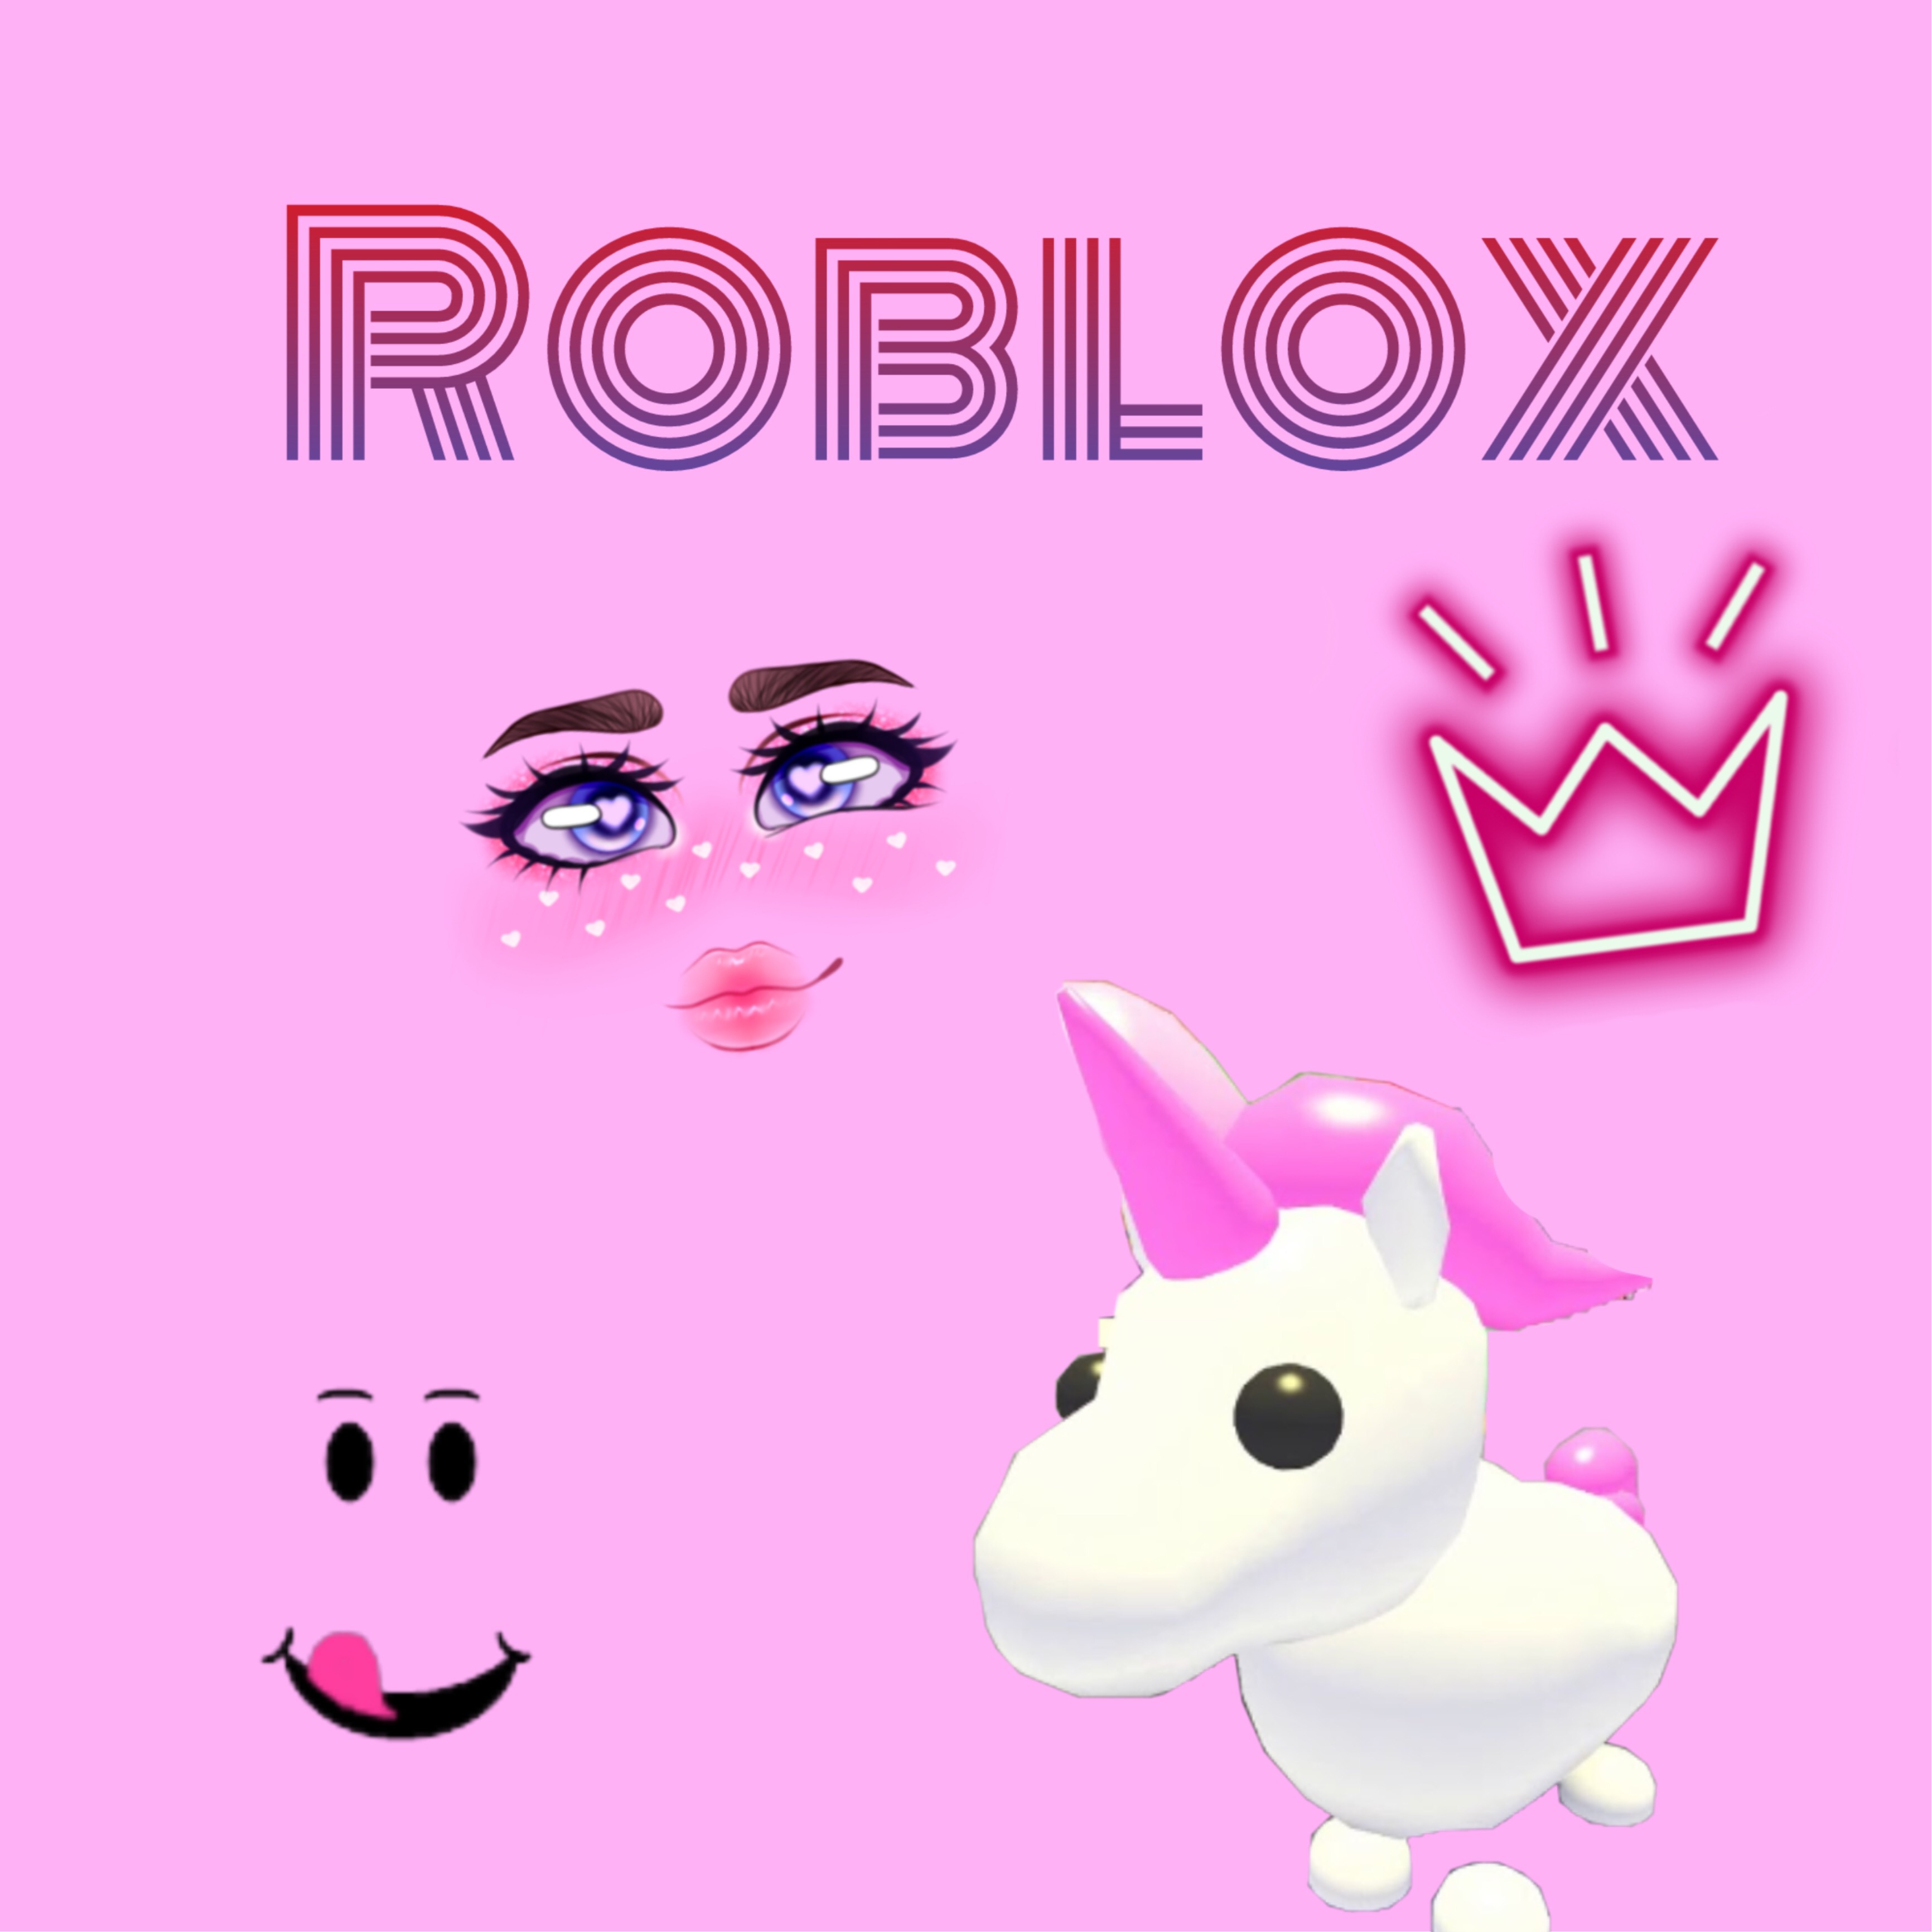 Roblox Wallpaper Wallpaperedit Image By Wallpaper - how to change your roblox backround